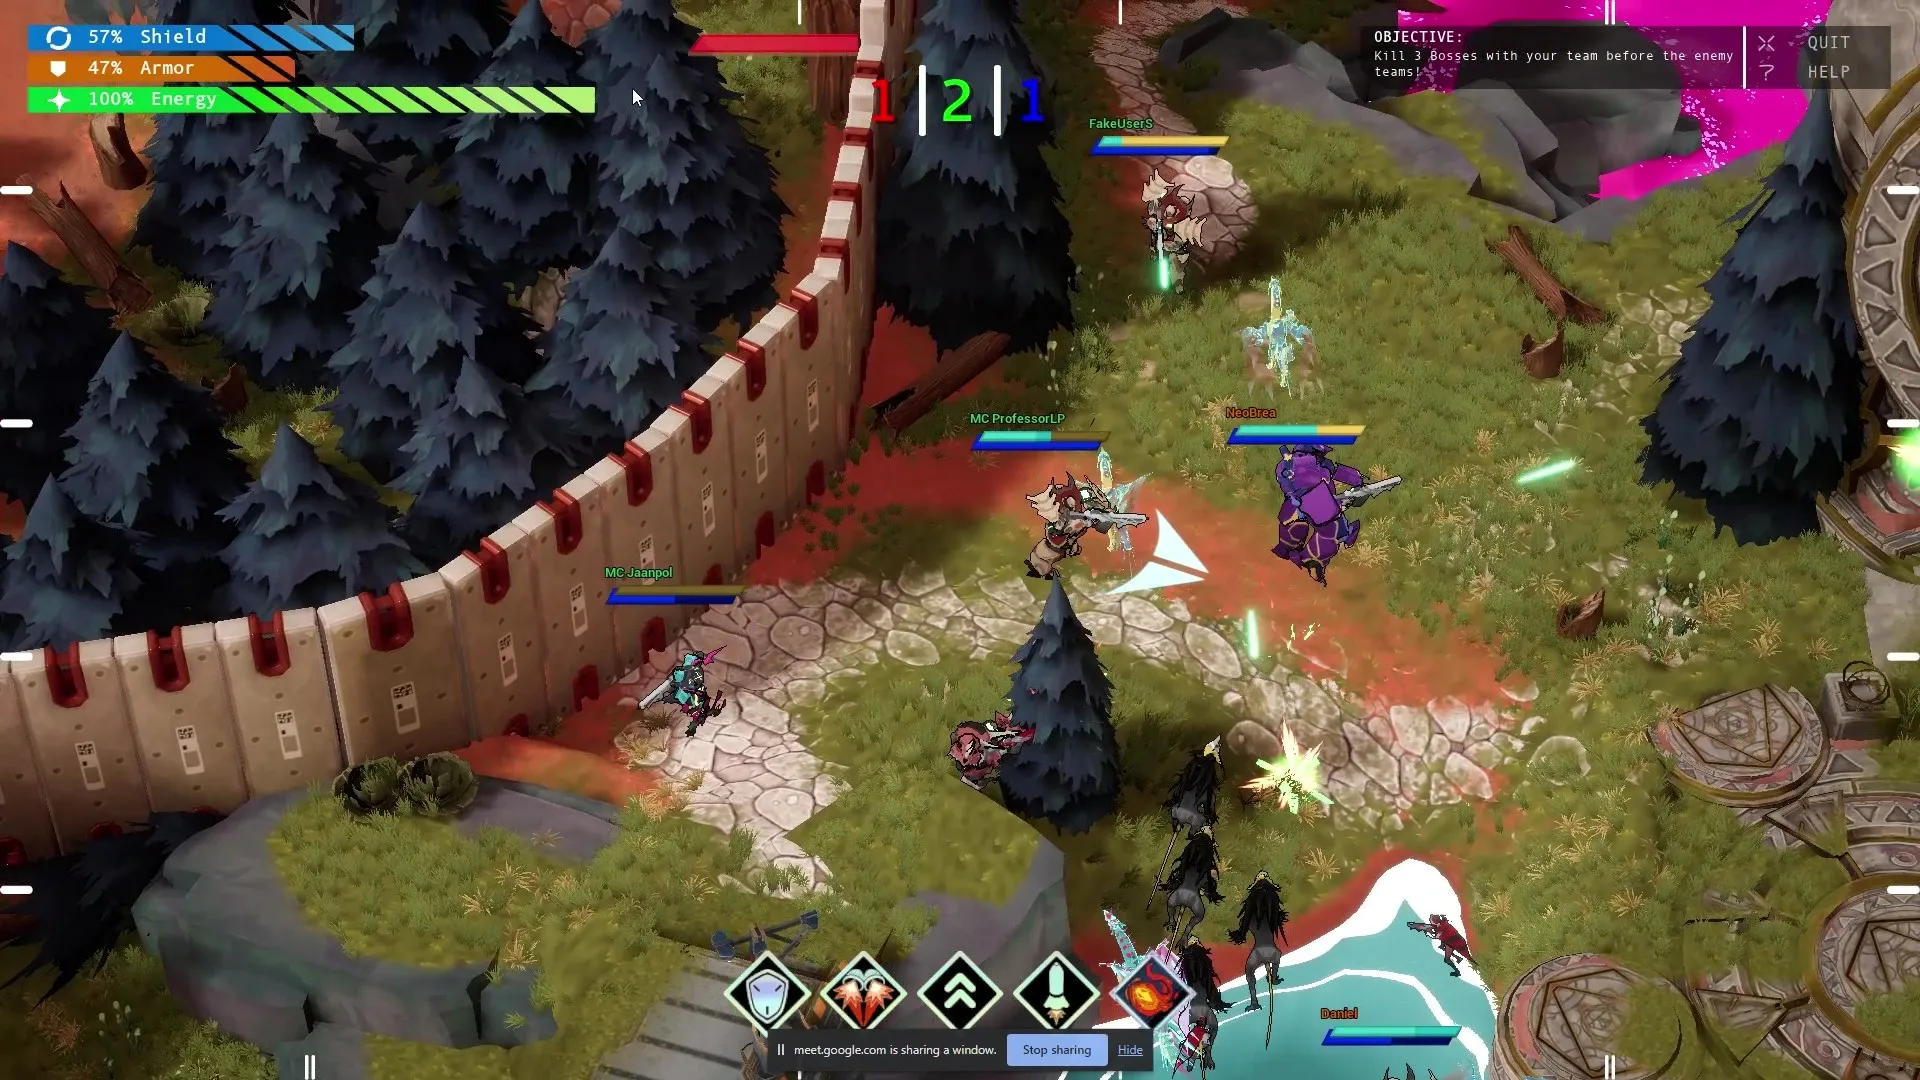 Kaidro gameplay: players engage in battle with other players